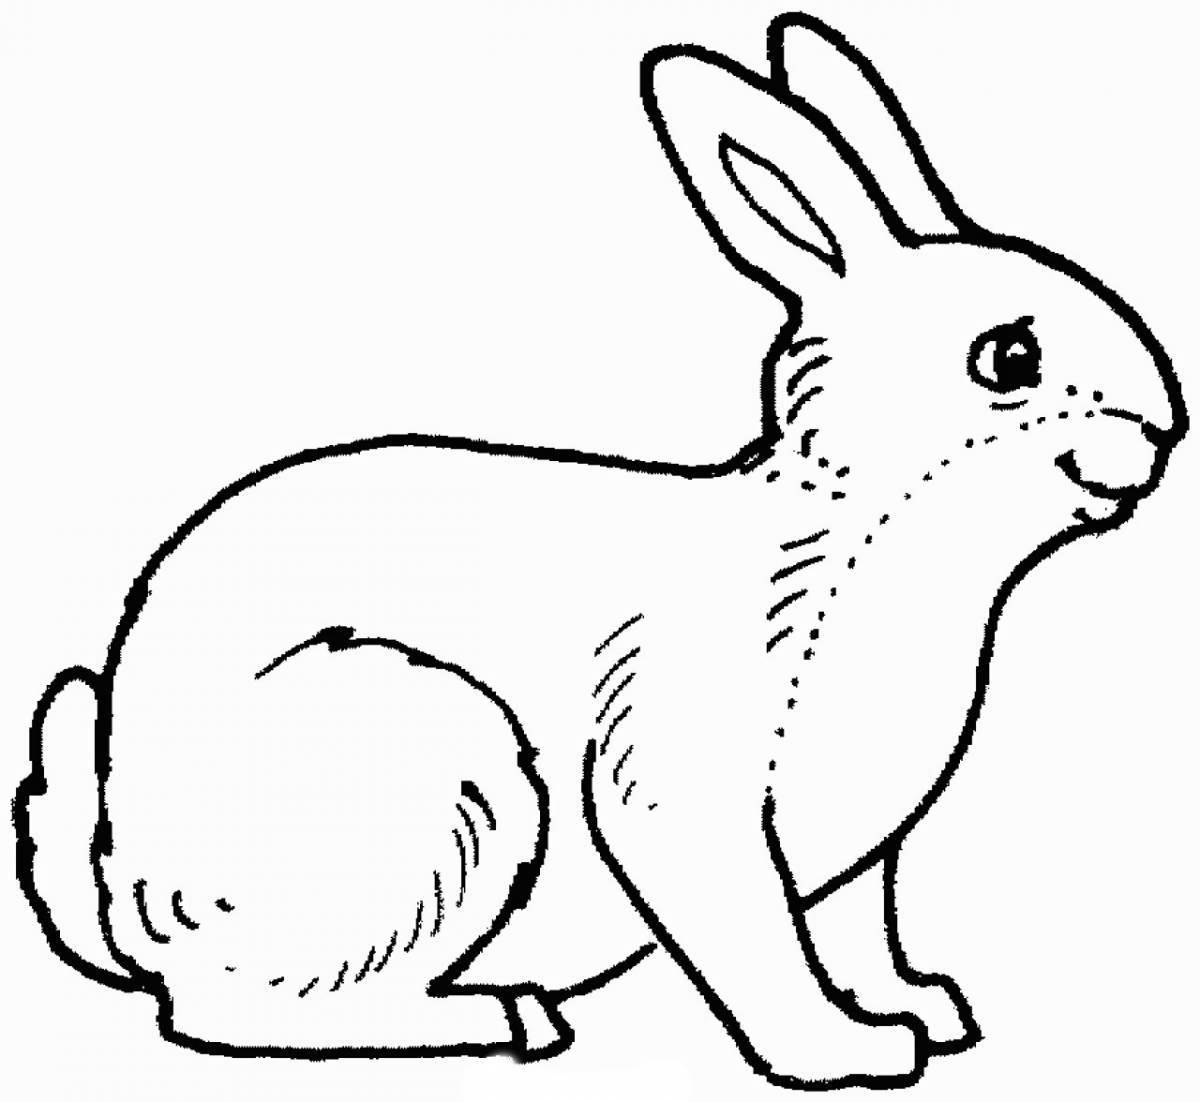 Coloring book cheerful hare and squirrel